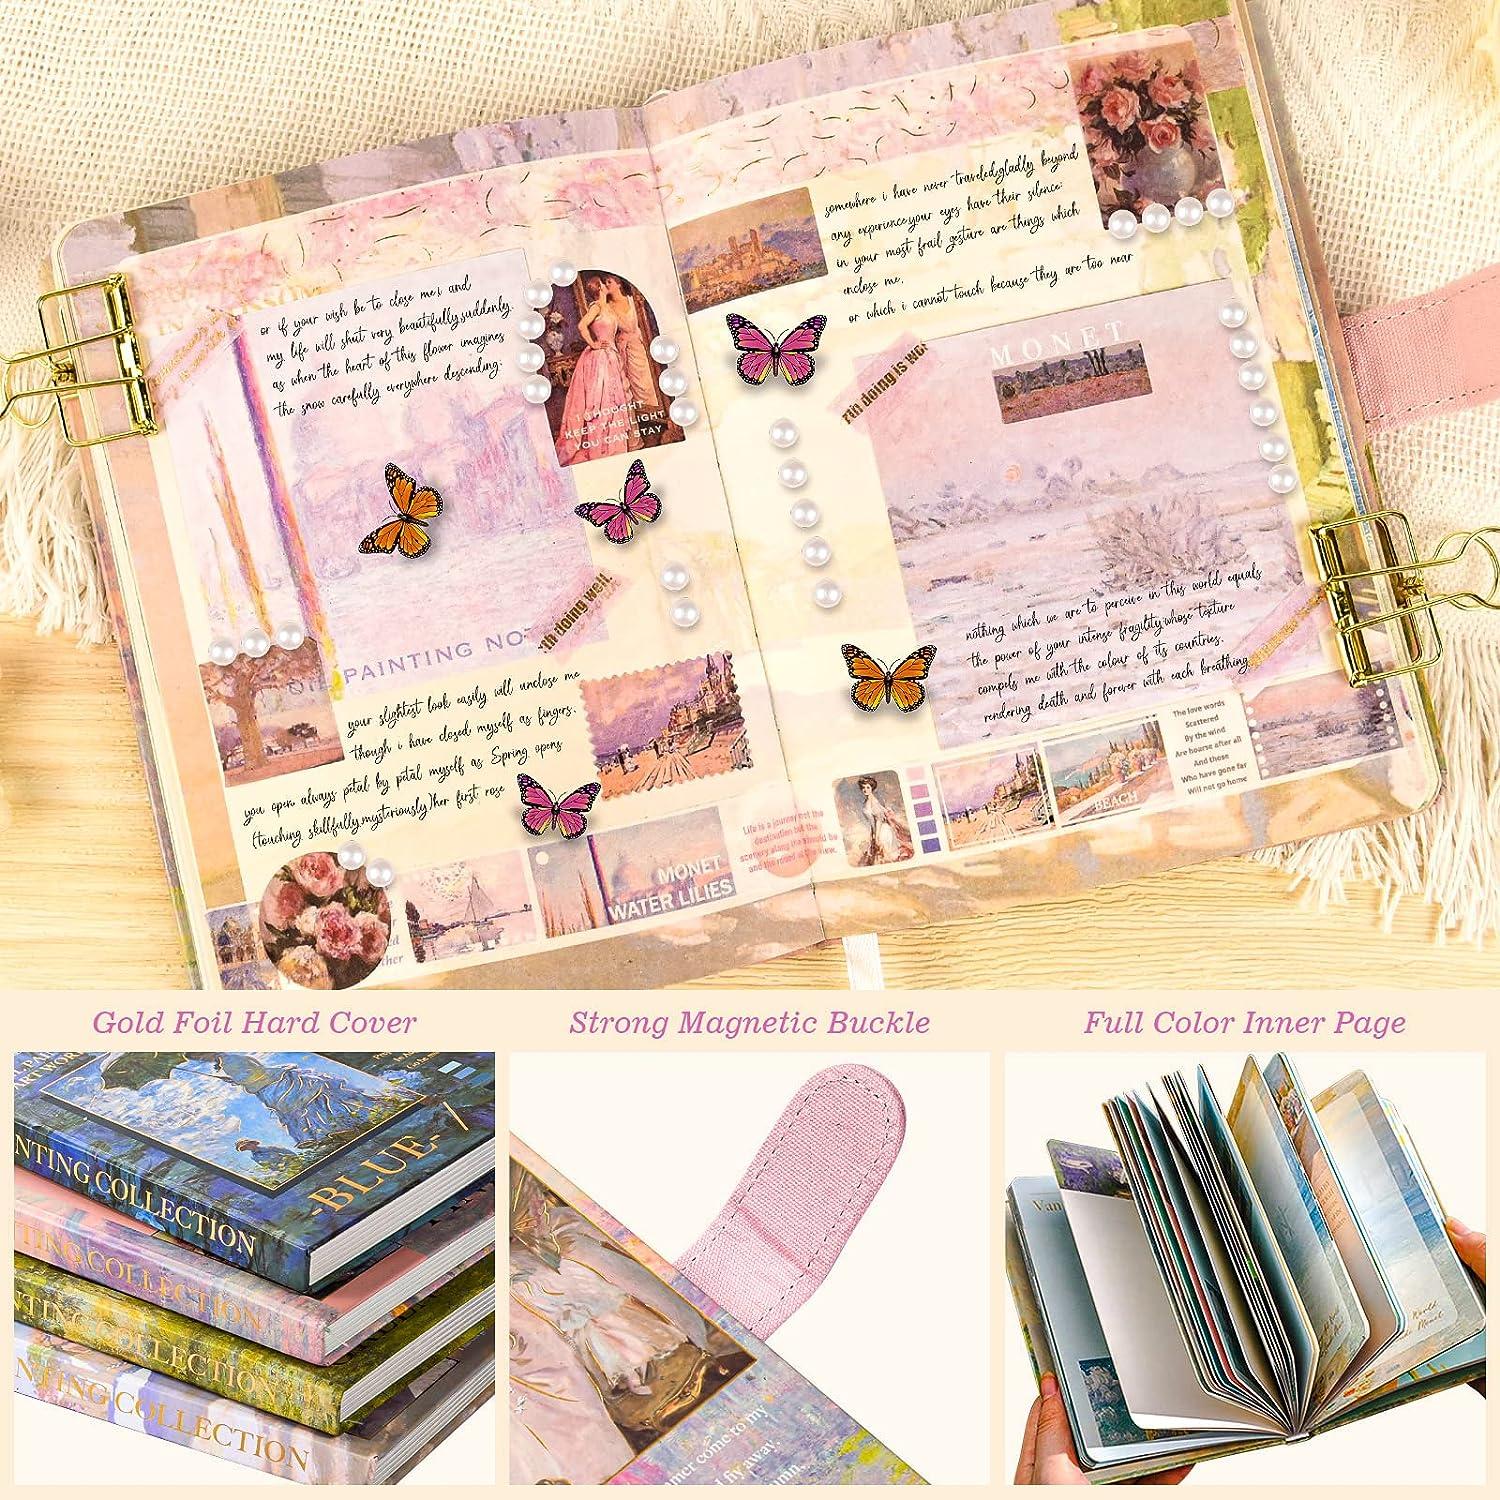 Scrapbooking Supplies Journaling Kit, Vintage Oil Painting Colorful Blank  Notebook for Junk Journal, Aesthetic Scrapbook Kit with Scrapbook Stickers  Washi Tapes, Art Journal Gift for Teen Girl Women Pink-Classical Rome